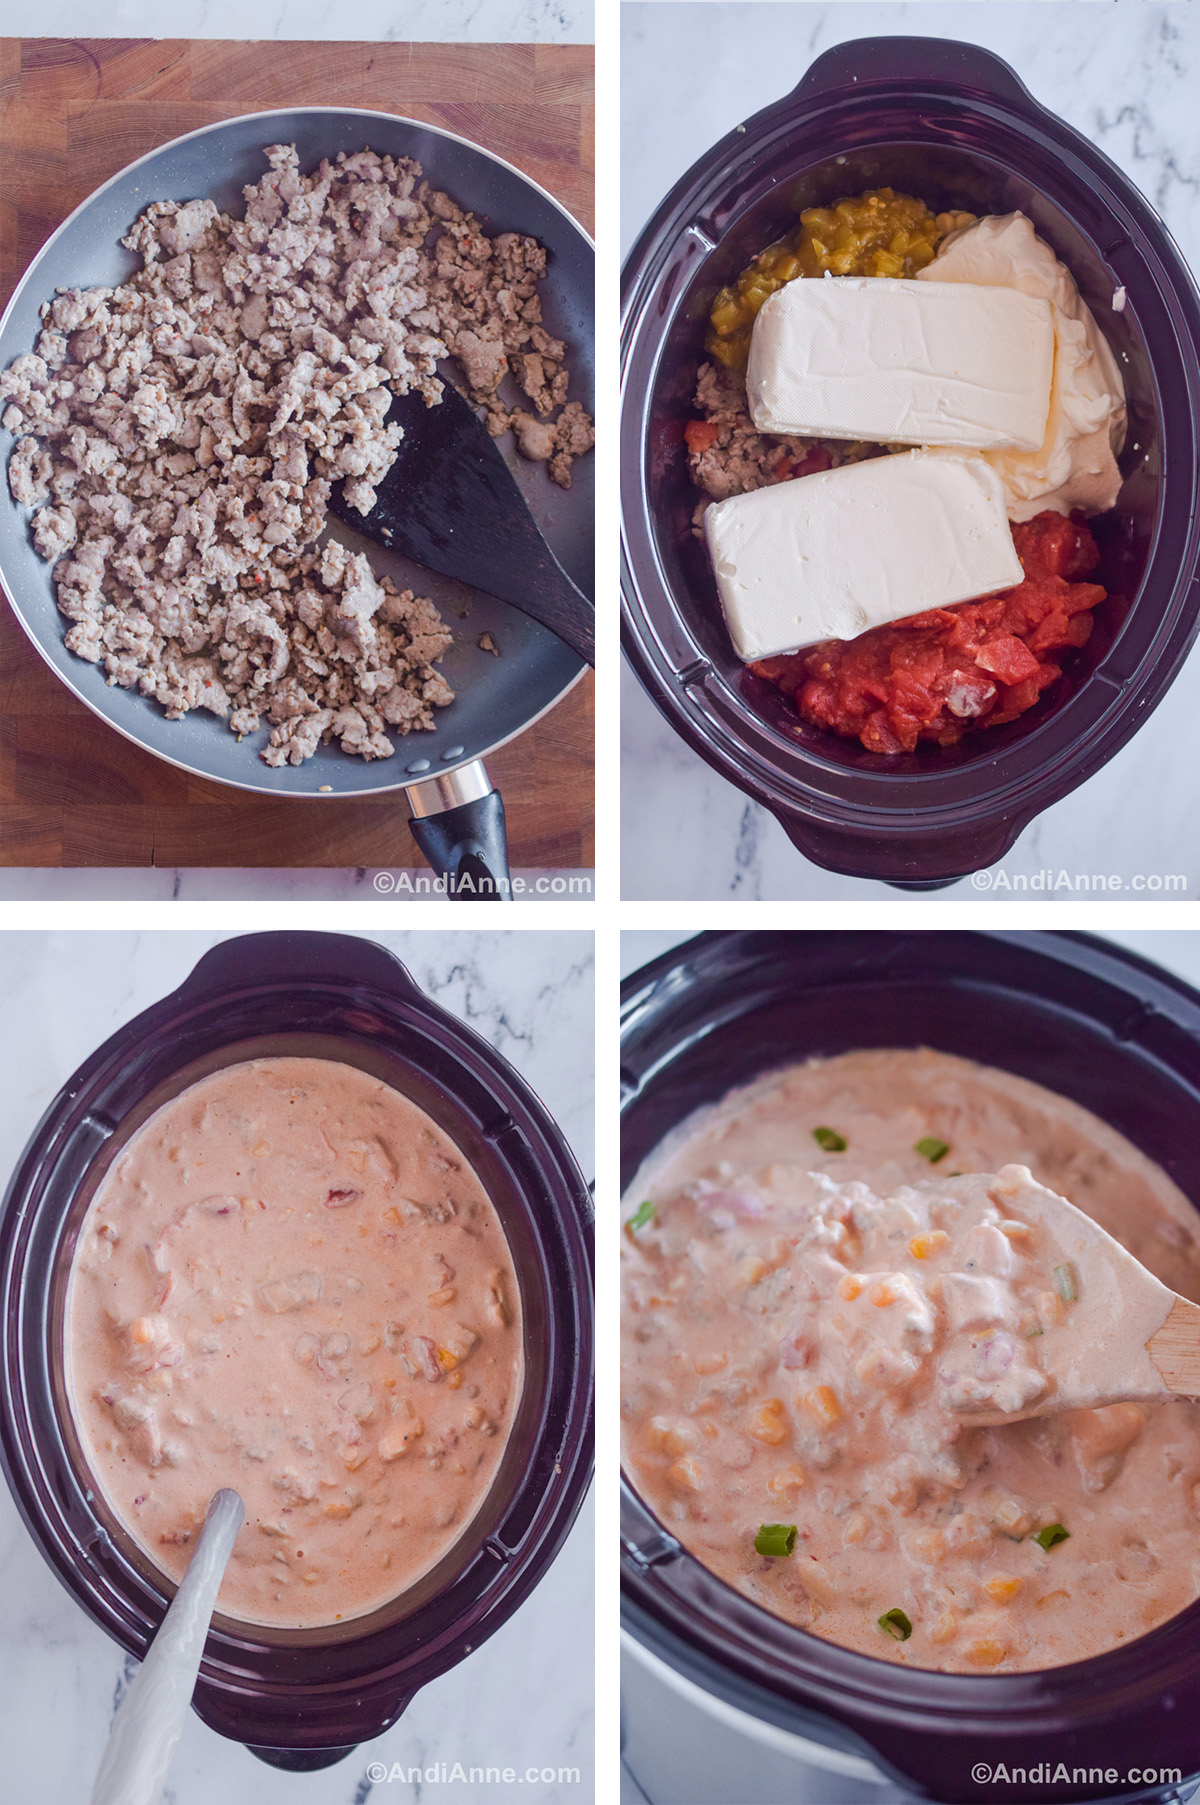 Four images showing steps to make the recipe, First is cooked crumbled ground sausage in a frying pan. Second is cream cheese and other ingredients dumped in the slow cooker. Third is the mixed cowboy crack dip in the slow cooker. Fourth is a close up of a spoon scooping the dip in the slow cooker.